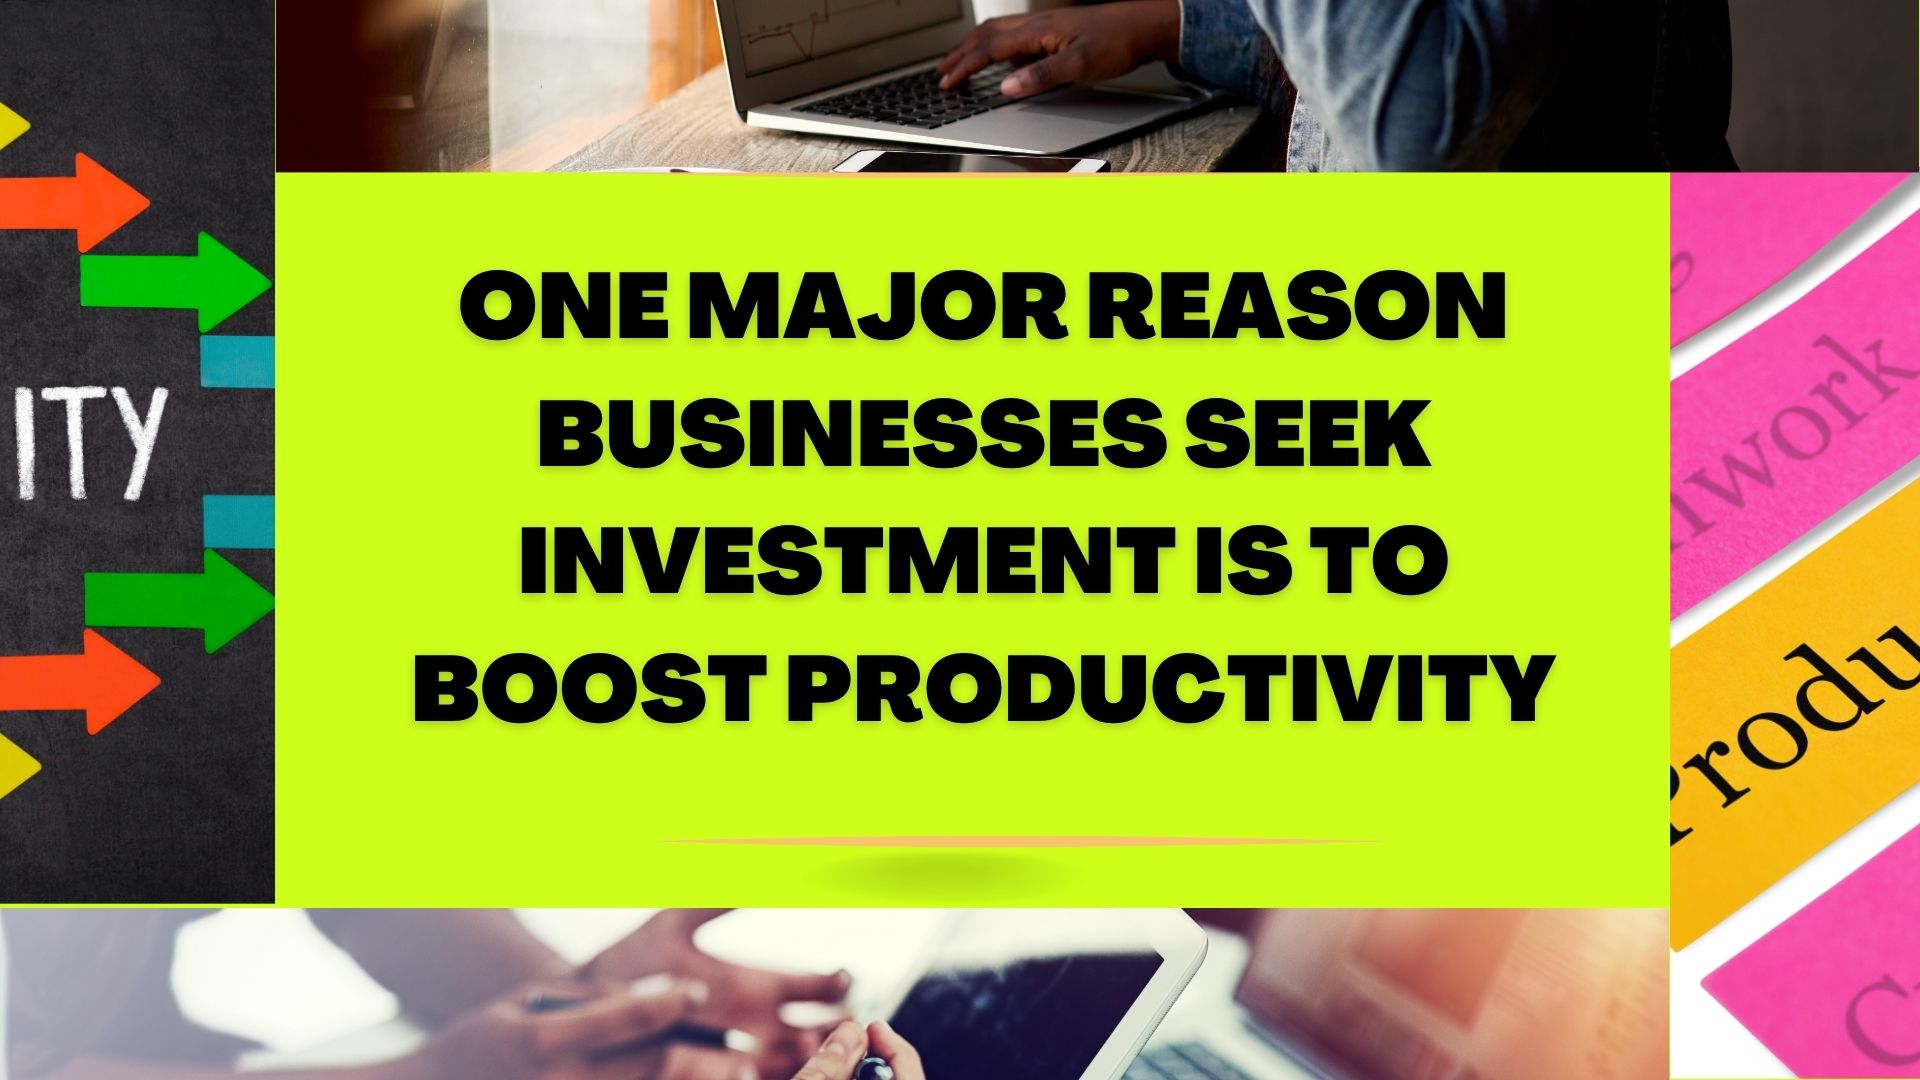 One Major Reason Businesses Seek Investment is to Boost Productivity